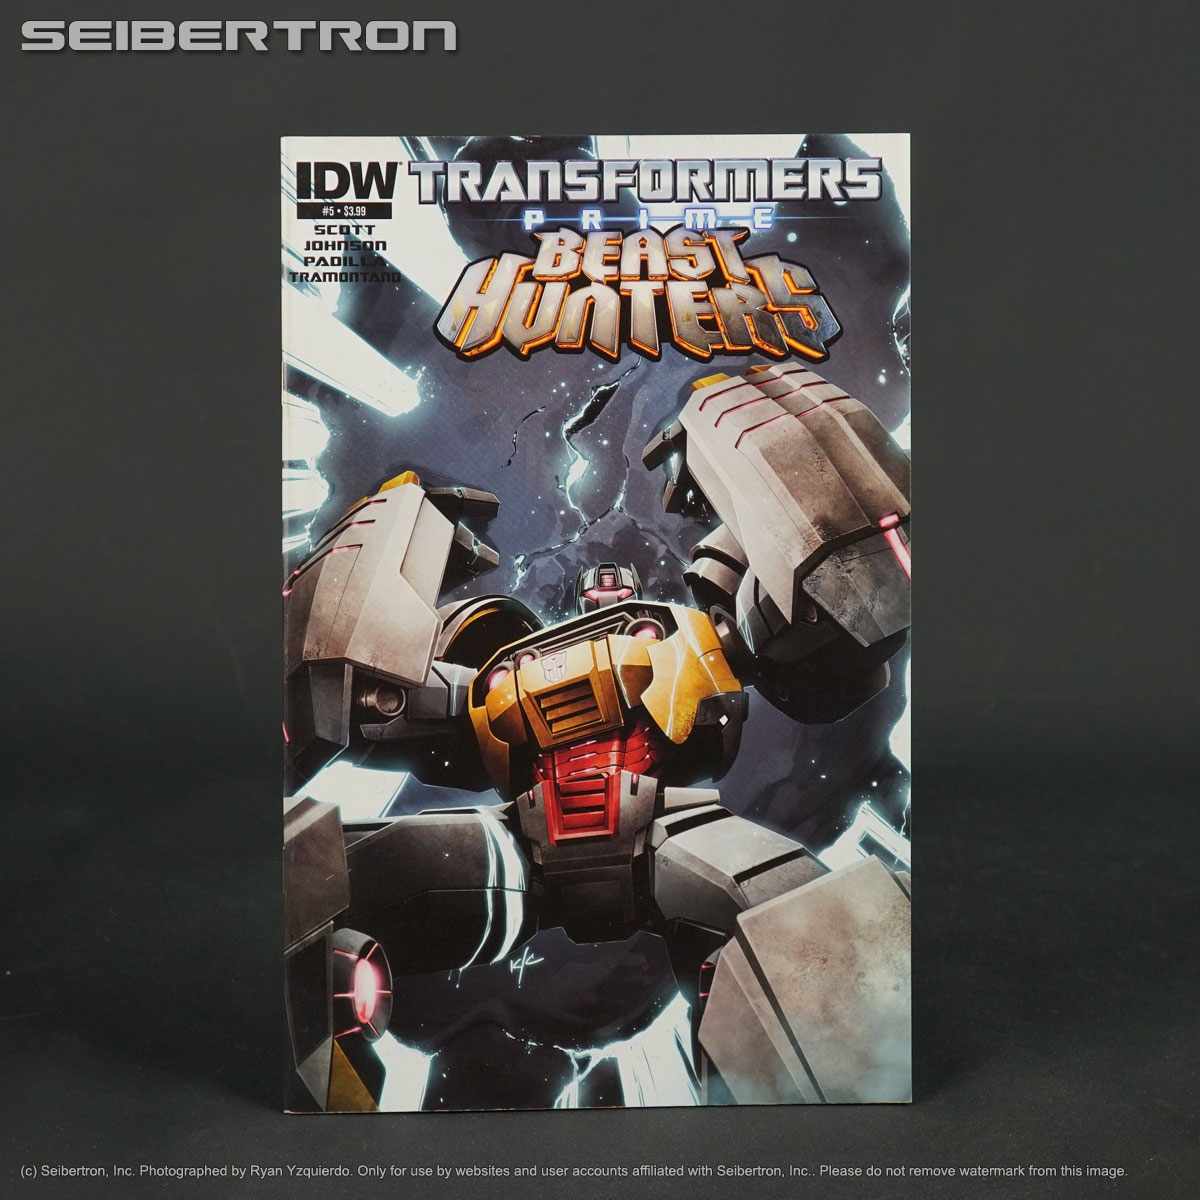 Transformers toys, Comic Books, BotBots, Masters of the Universe, Teenage Mutant Ninja Turtles, Gobots, and other listings from Seibertron.com: Transformers Prime Beast Hunters #5 Cvr A IDW Comics 2013 5A (CA) Christiansen (W) Johnson (A) Padilla